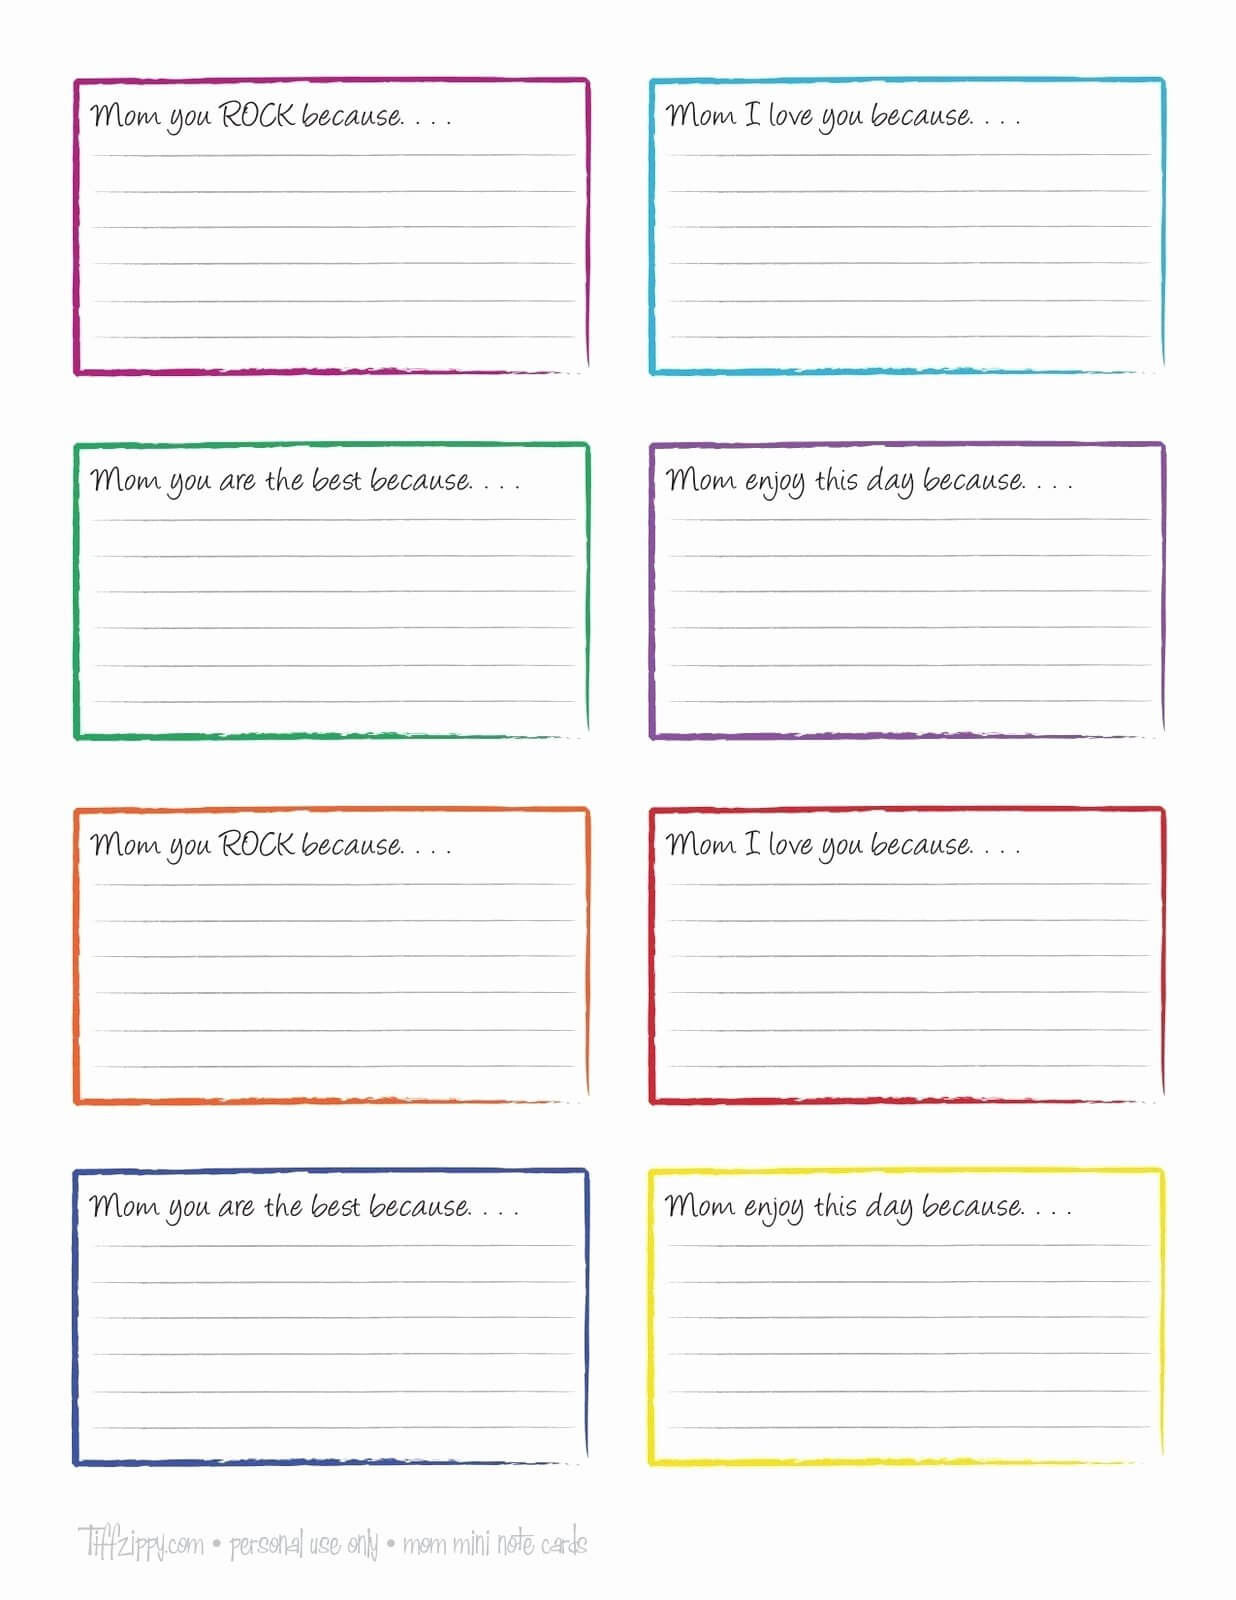 30 Note Card Template Google Docs | Pryncepality In Google Docs Note Card Template